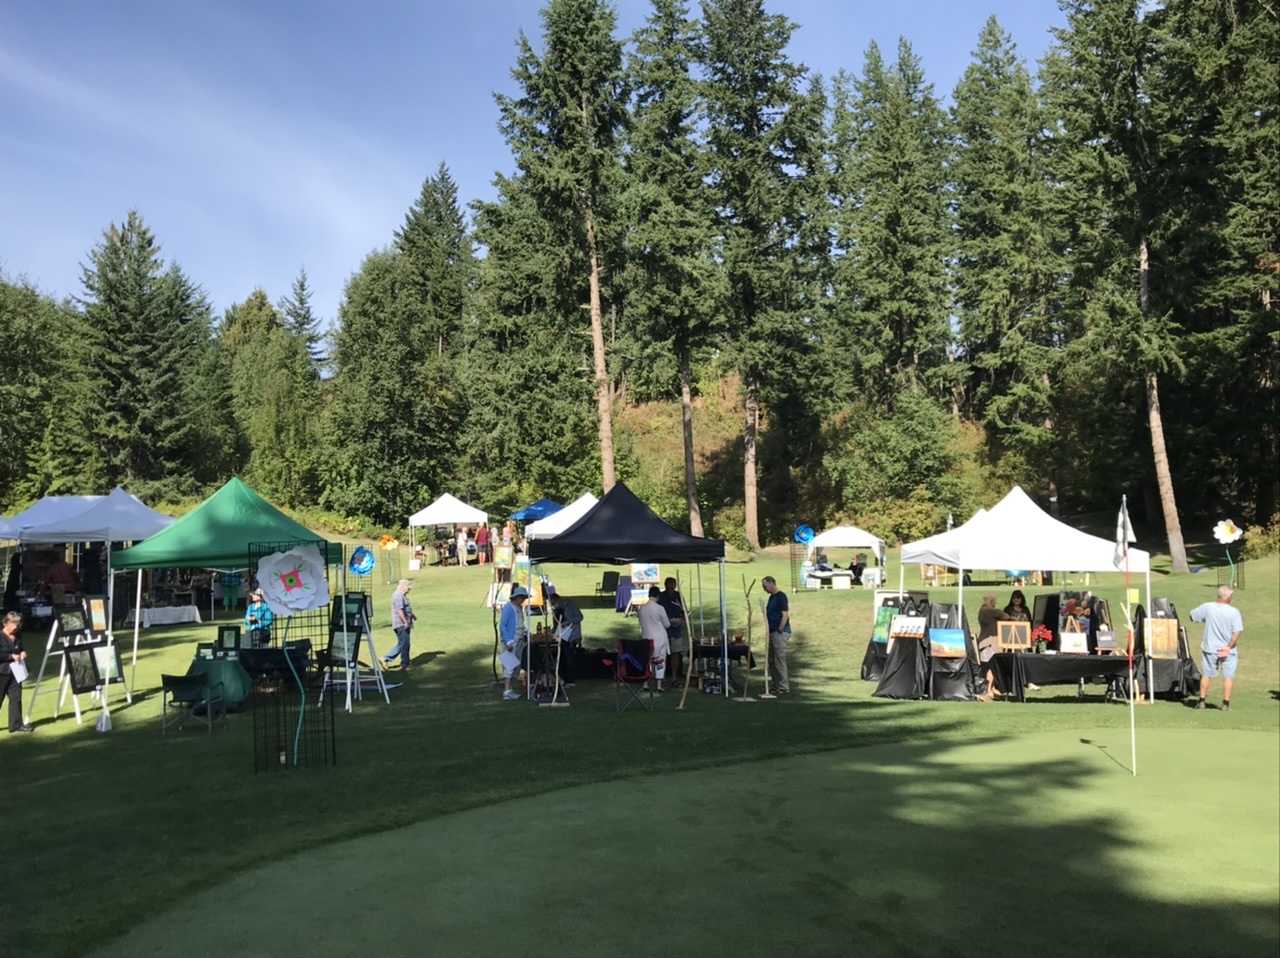 Art on the Green: Art on the Green is a one-day event each August that showcases beautiful works of art in a lush, outdoor setting. You can expect to see works in a variety […]